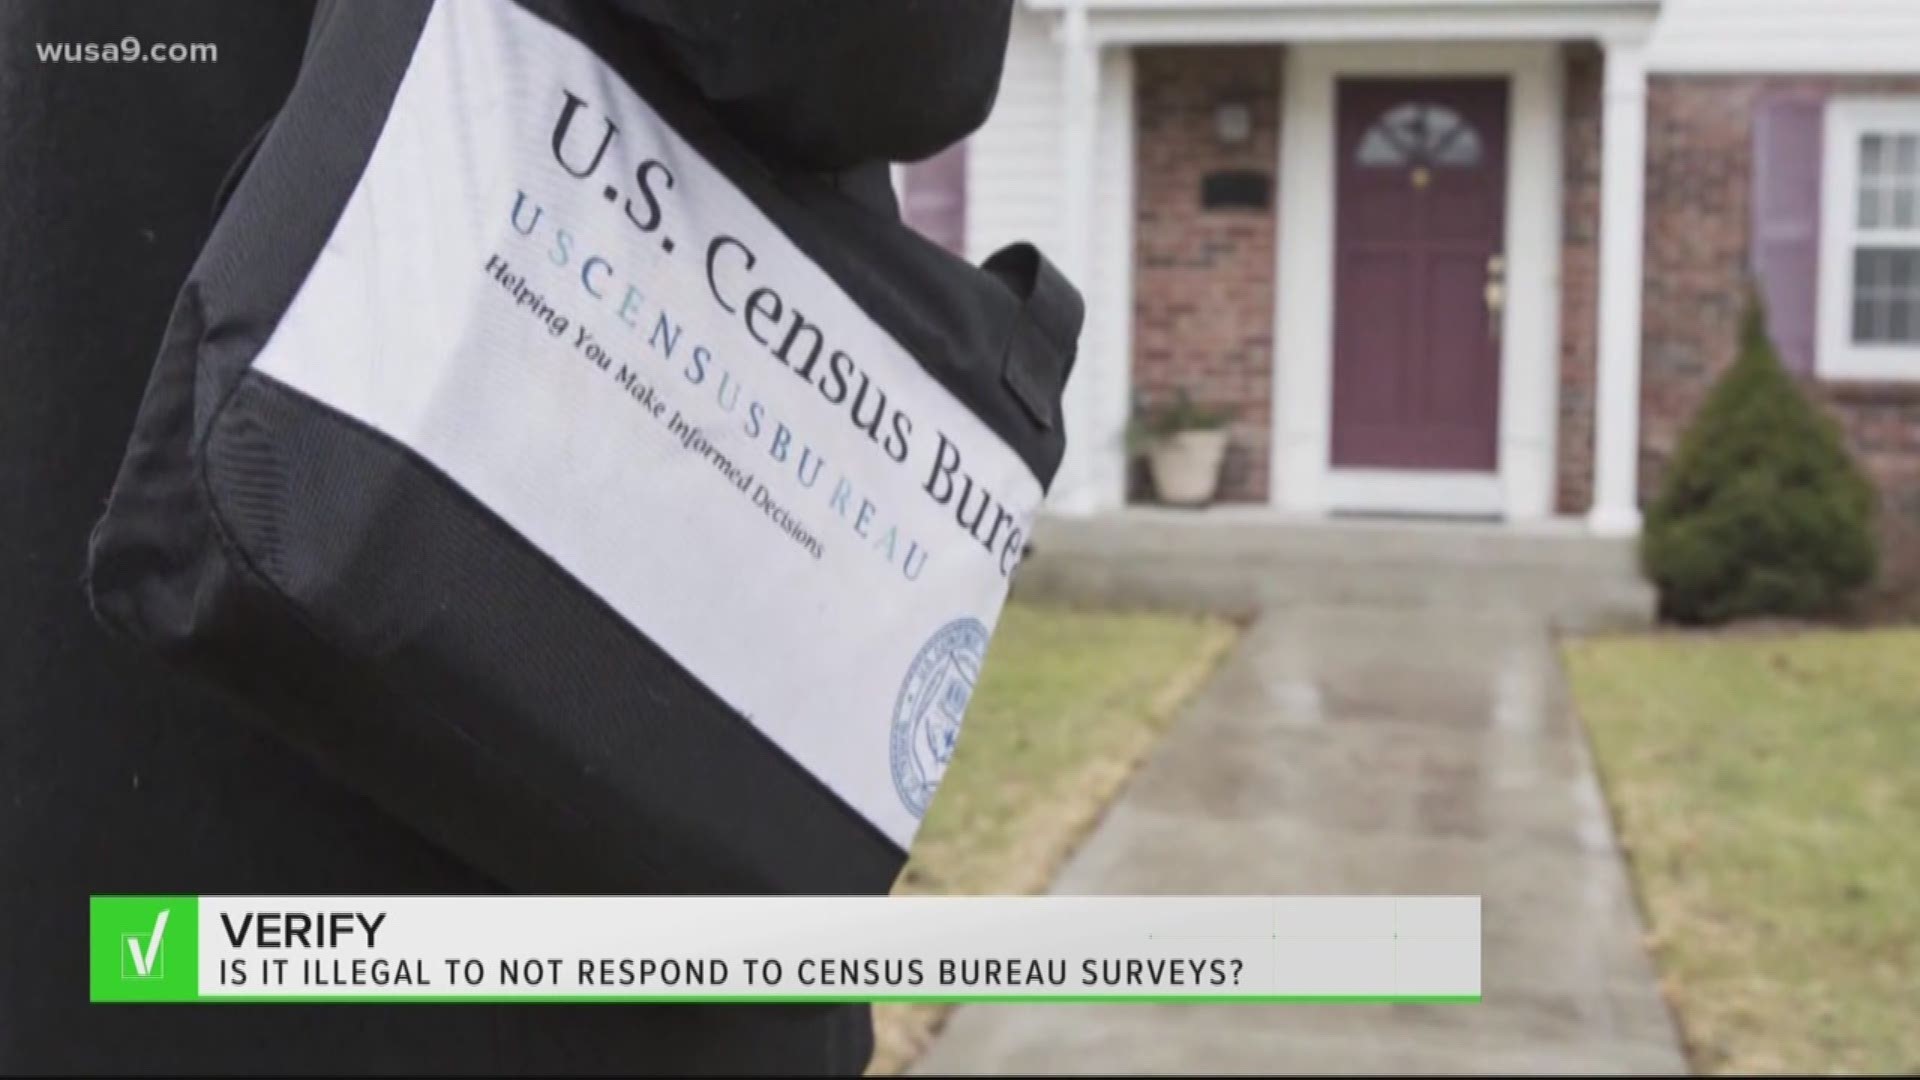 There are a lot of questions about the upcoming 2020 Census. Like, what happens if you don't respond to the survey? The Verify team got answers.